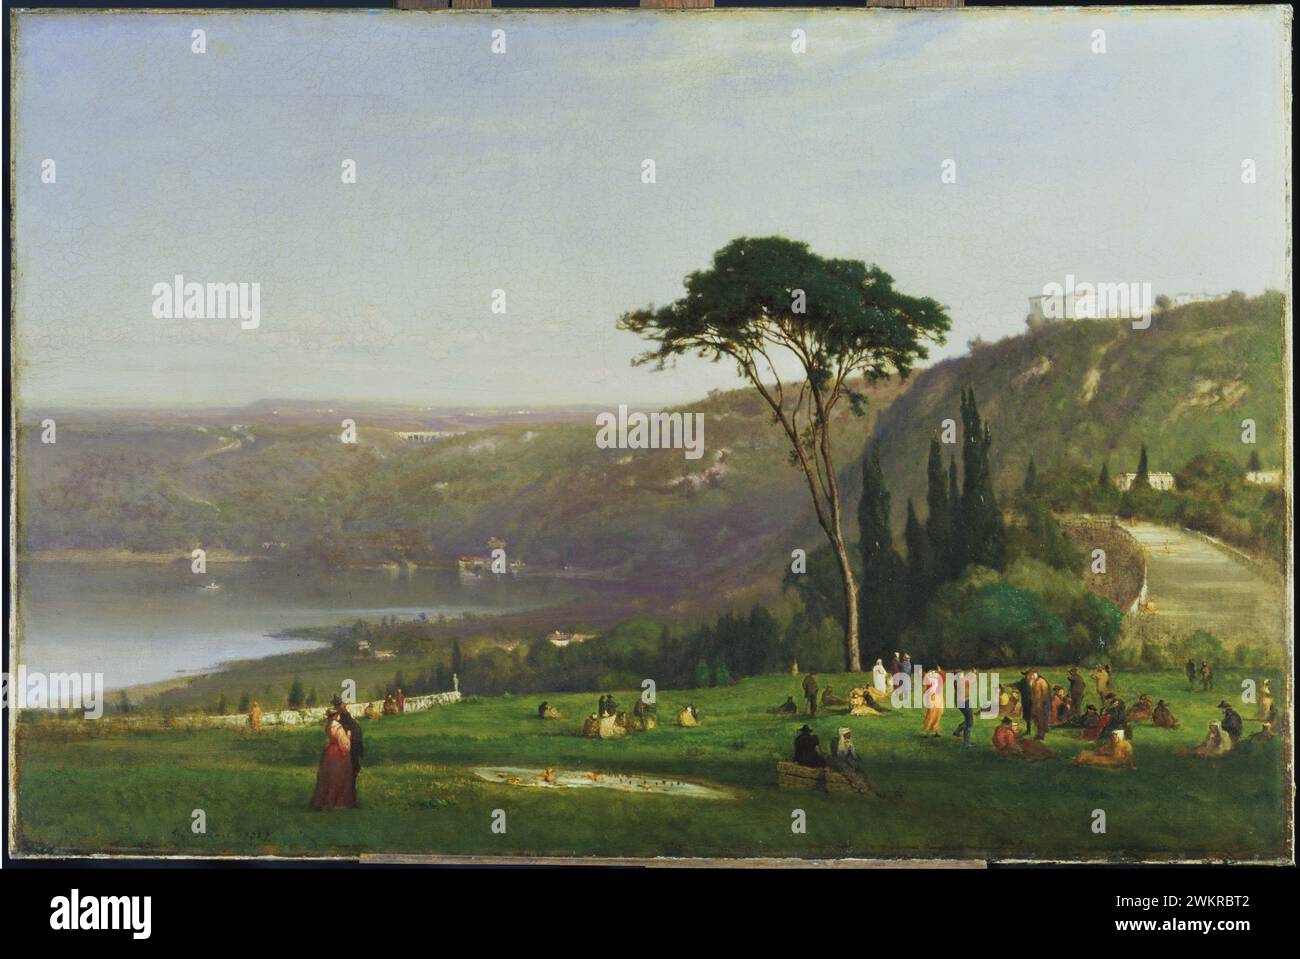 George Inness, Lake Albano, landscape painting in oil on canvas, 1869 Stock Photo